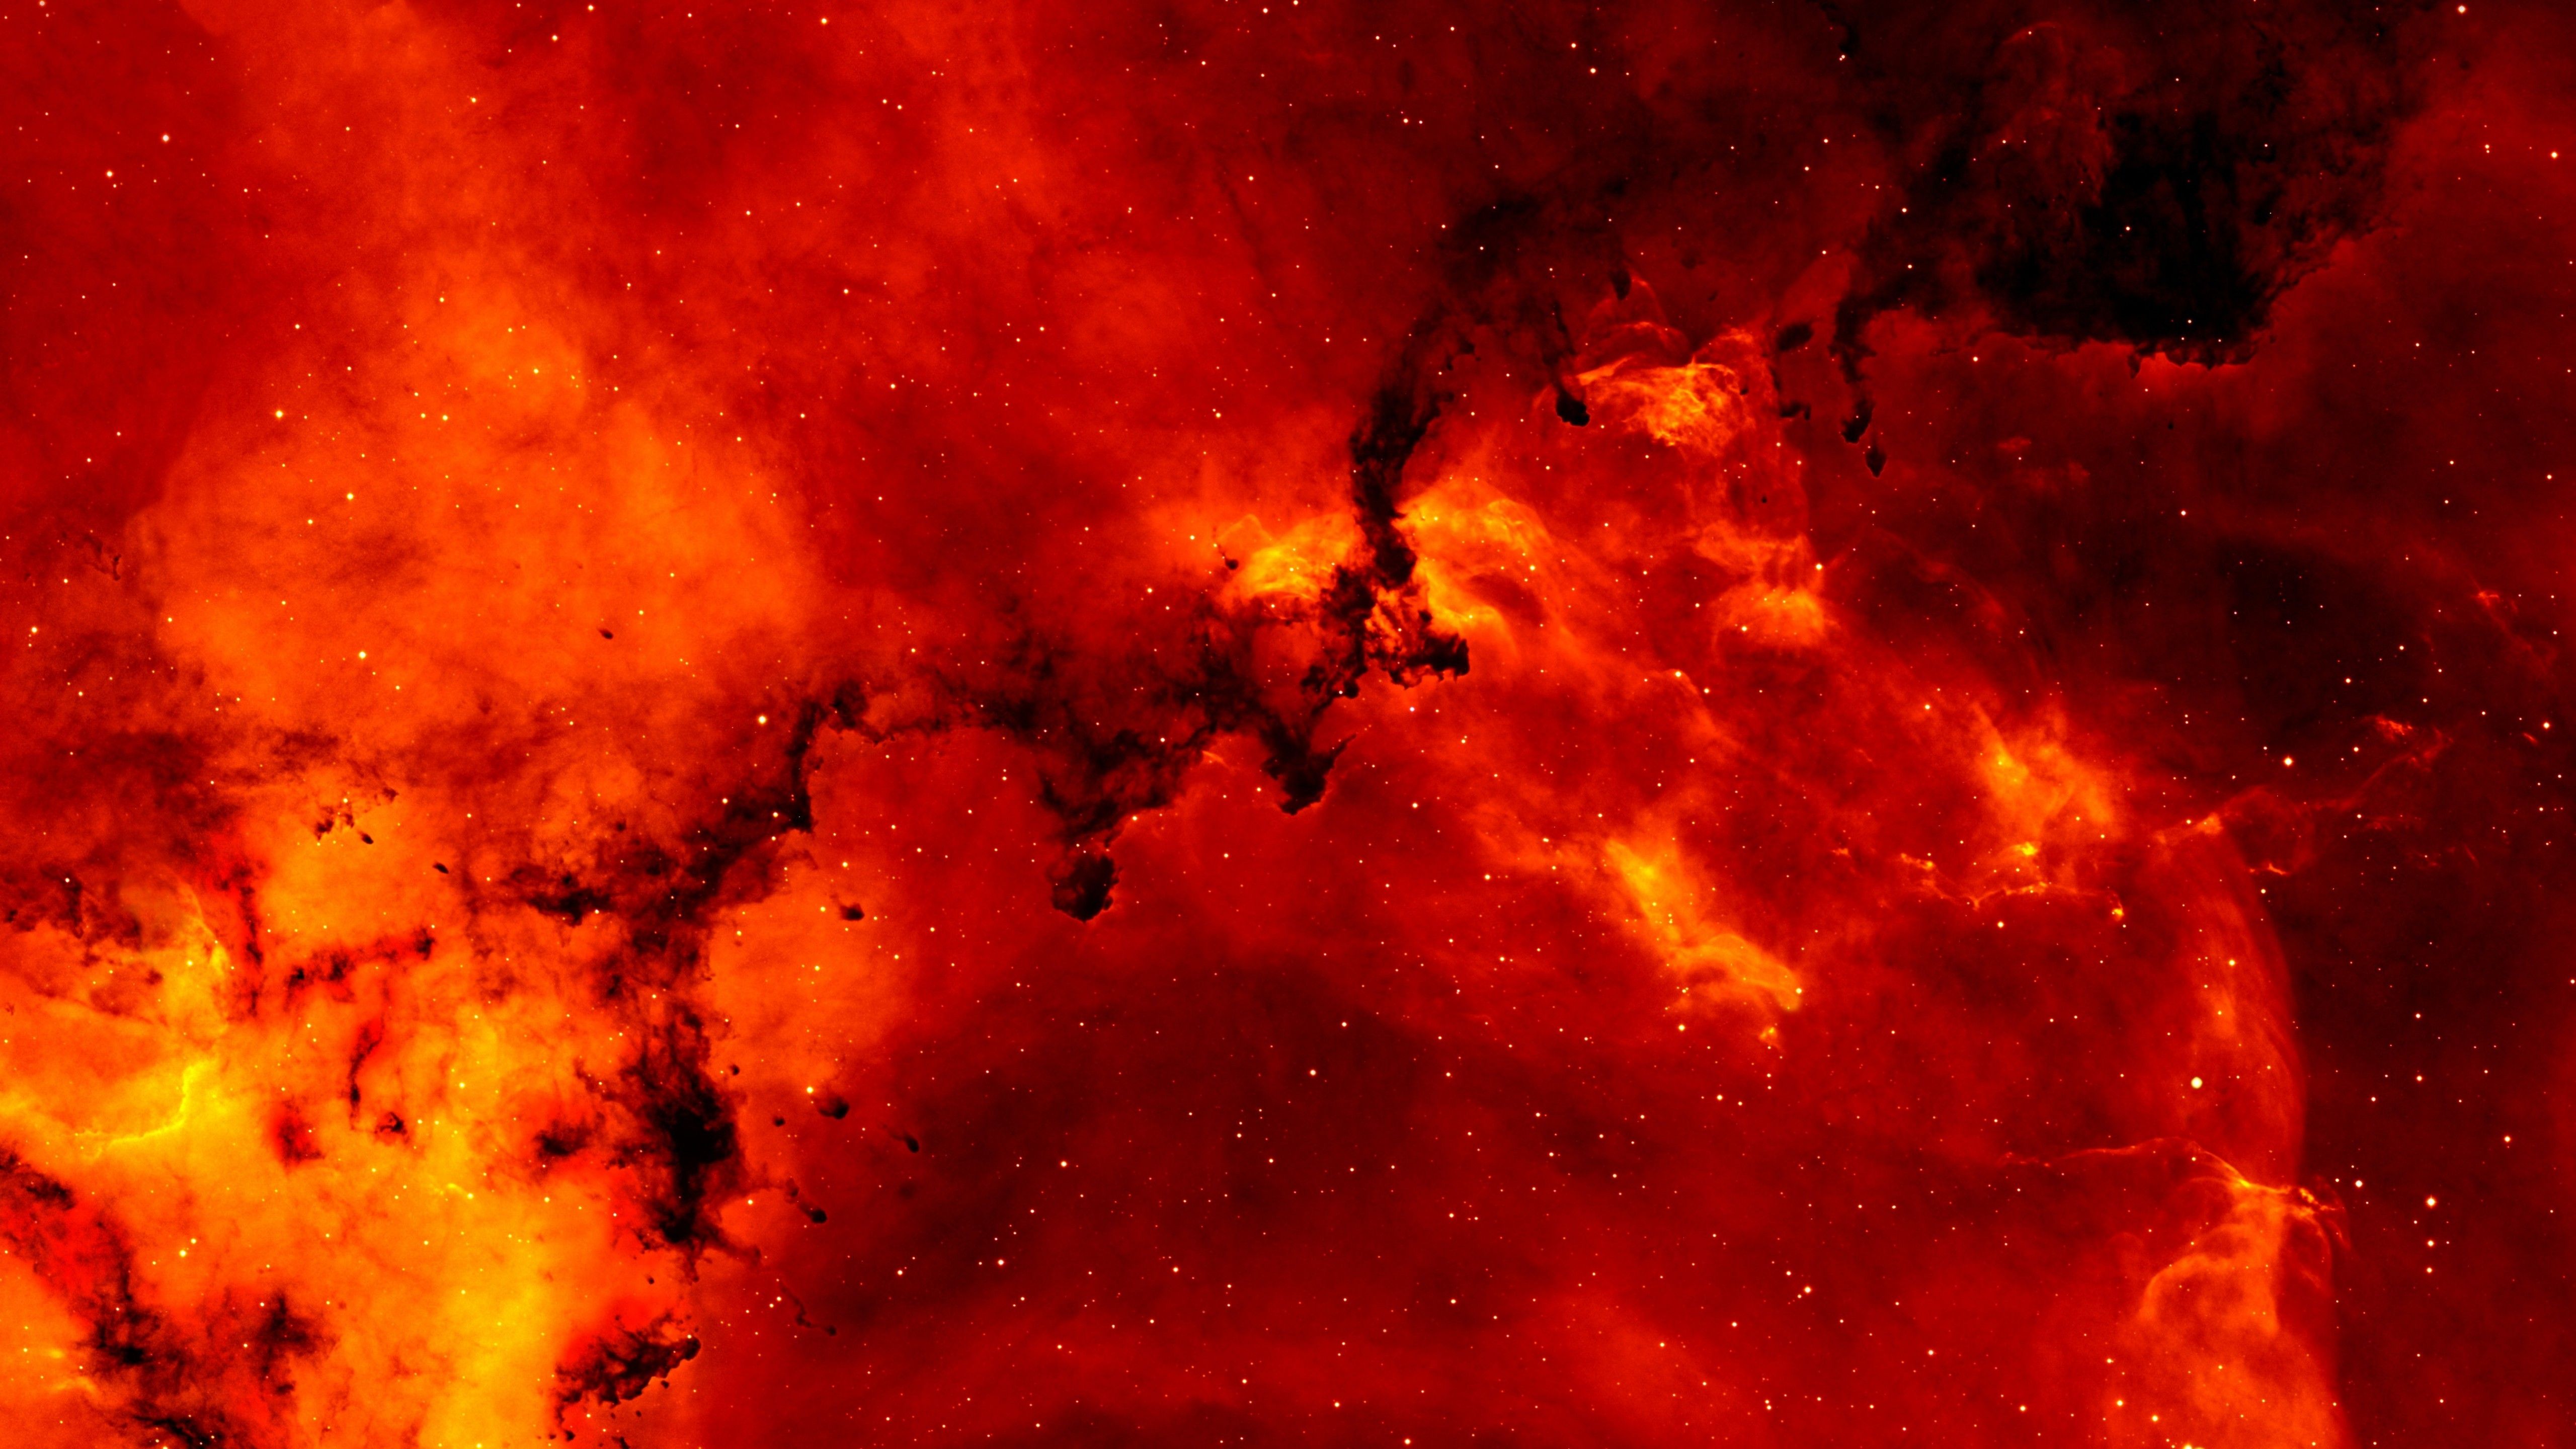 Solar flares 4K Wallpaper, Fire, Outer space, Blazing, Red background, Galaxy, 5K, Space